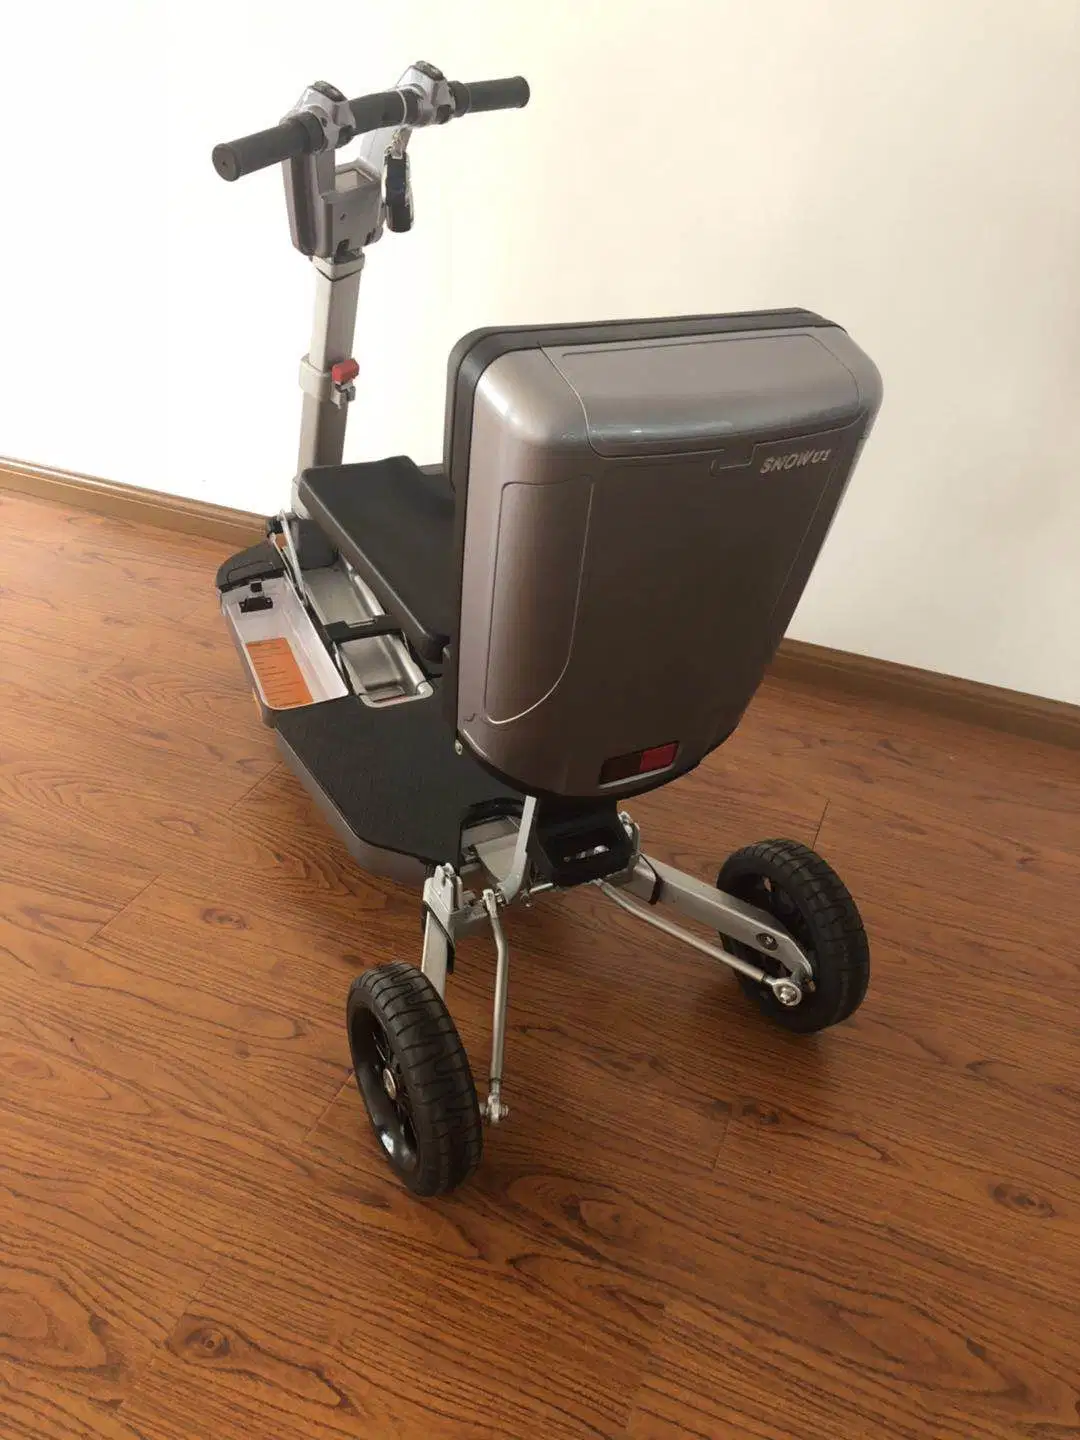 New Electric 4 Wheel Disabled Mobility Folding Foldable Scooter for Elderly or Handicapped Power Scooter